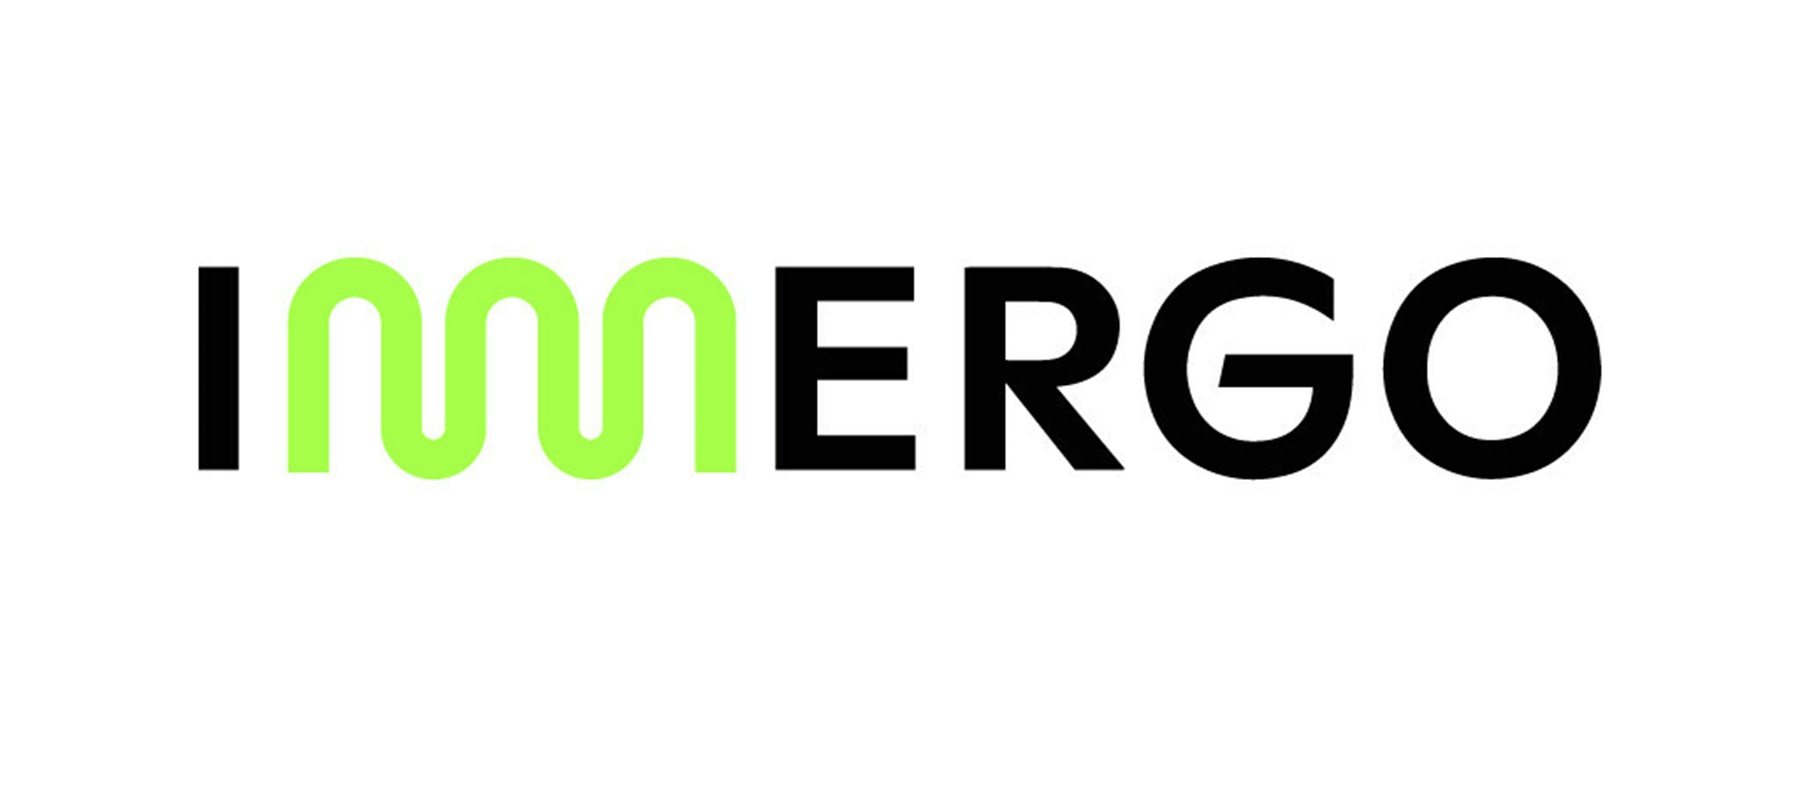 Immergo acquires Frankly Media assets, forging a powerful digital media solution